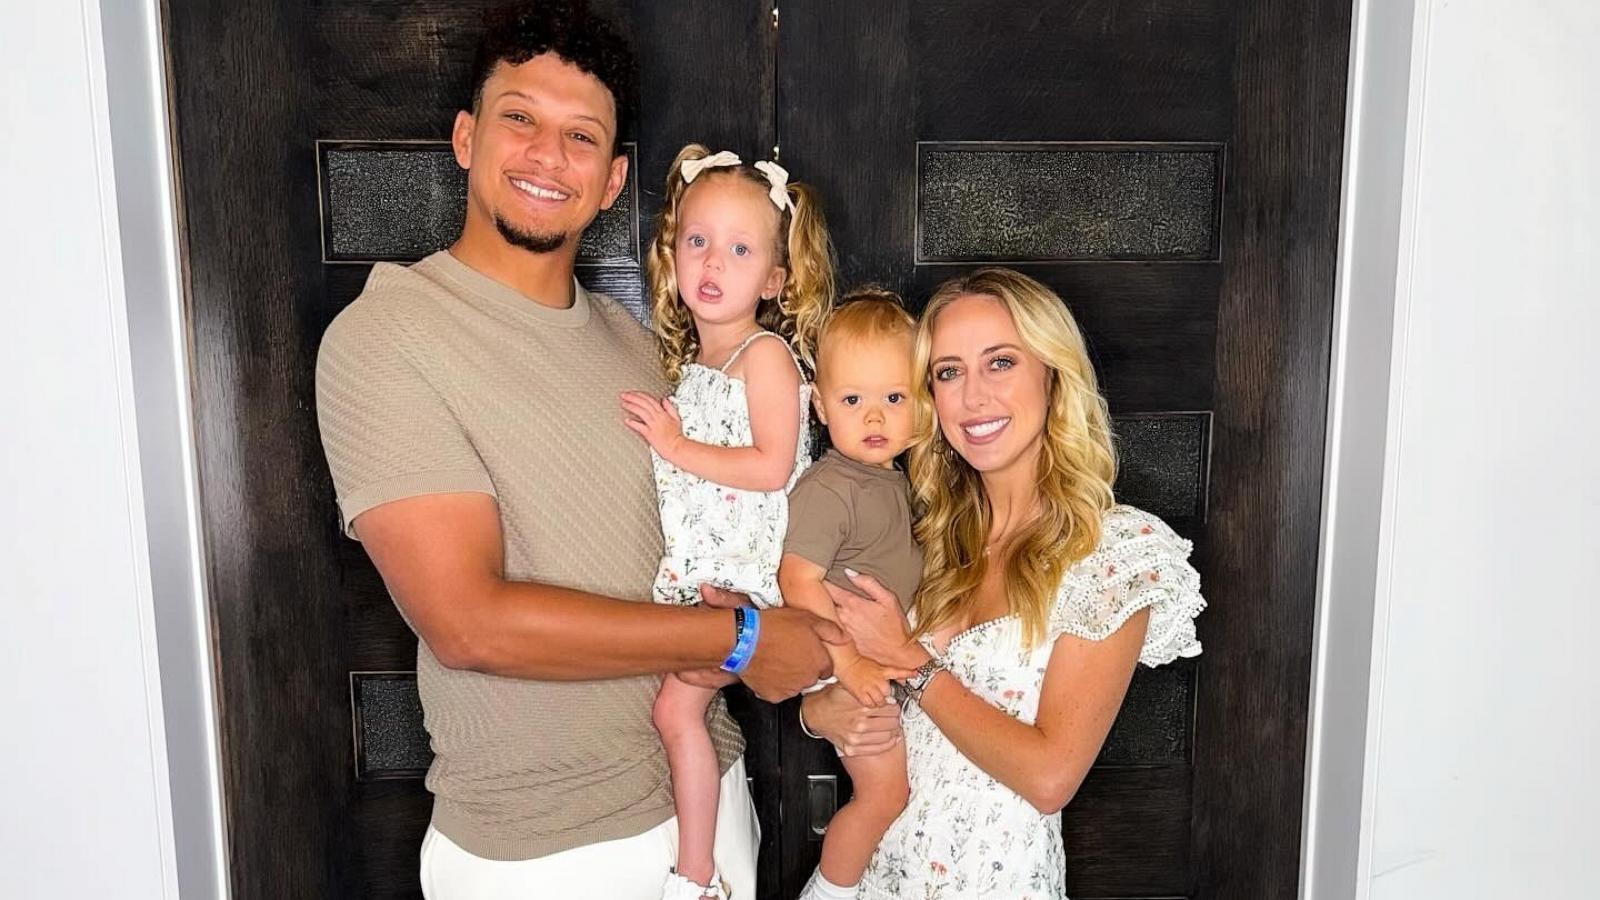 PHOTO: Brittany Mahomes shared a family photo on Instagram on Mother's Day, writing, "Being a Mom is the best title could ever have."